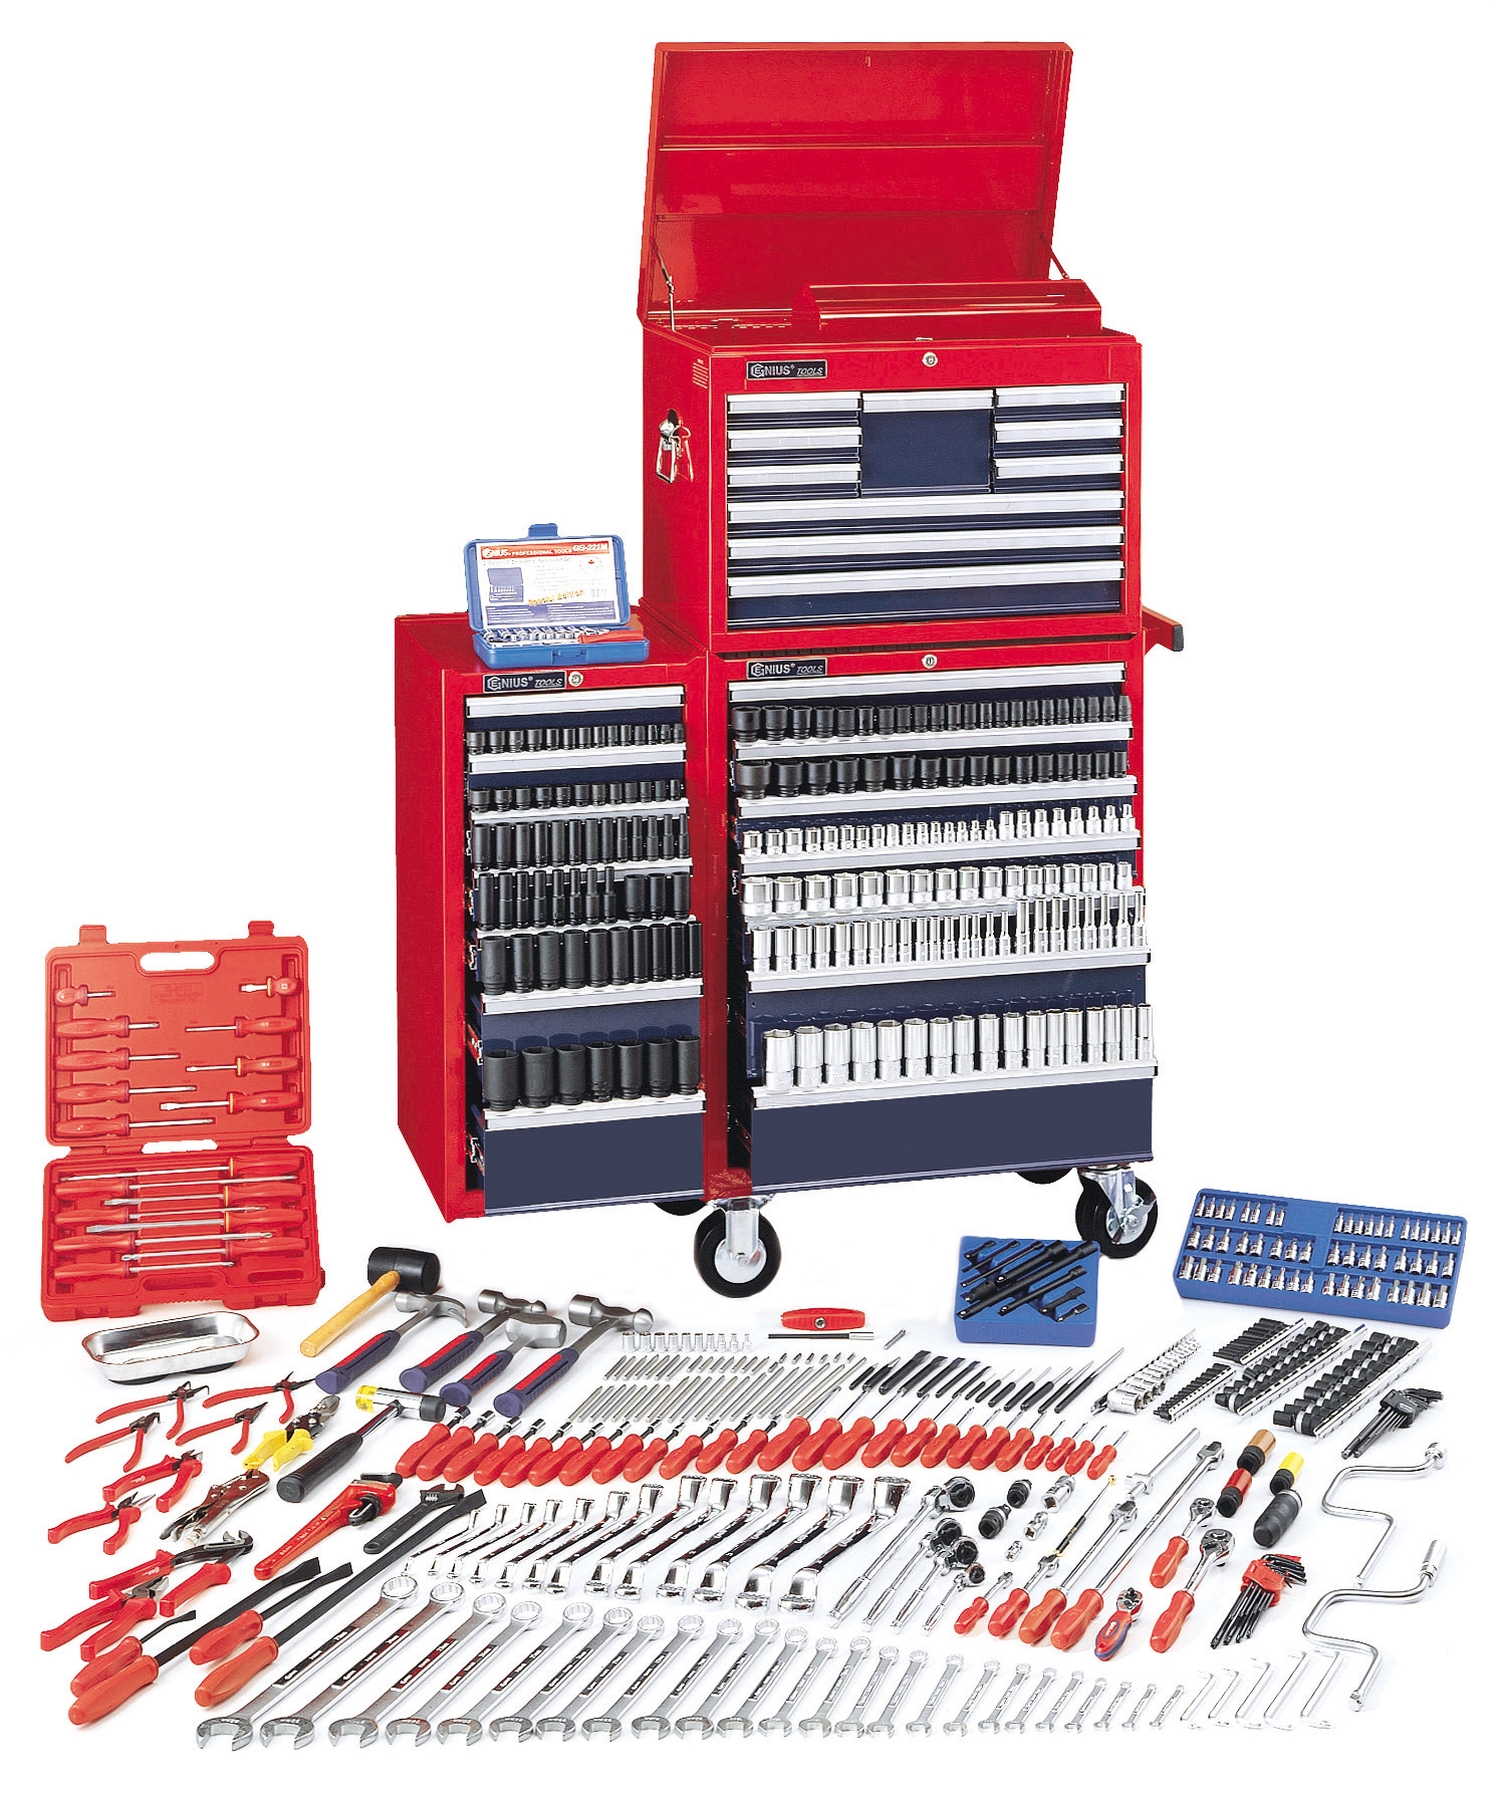 541PC Metric Master Set with Tool Chests